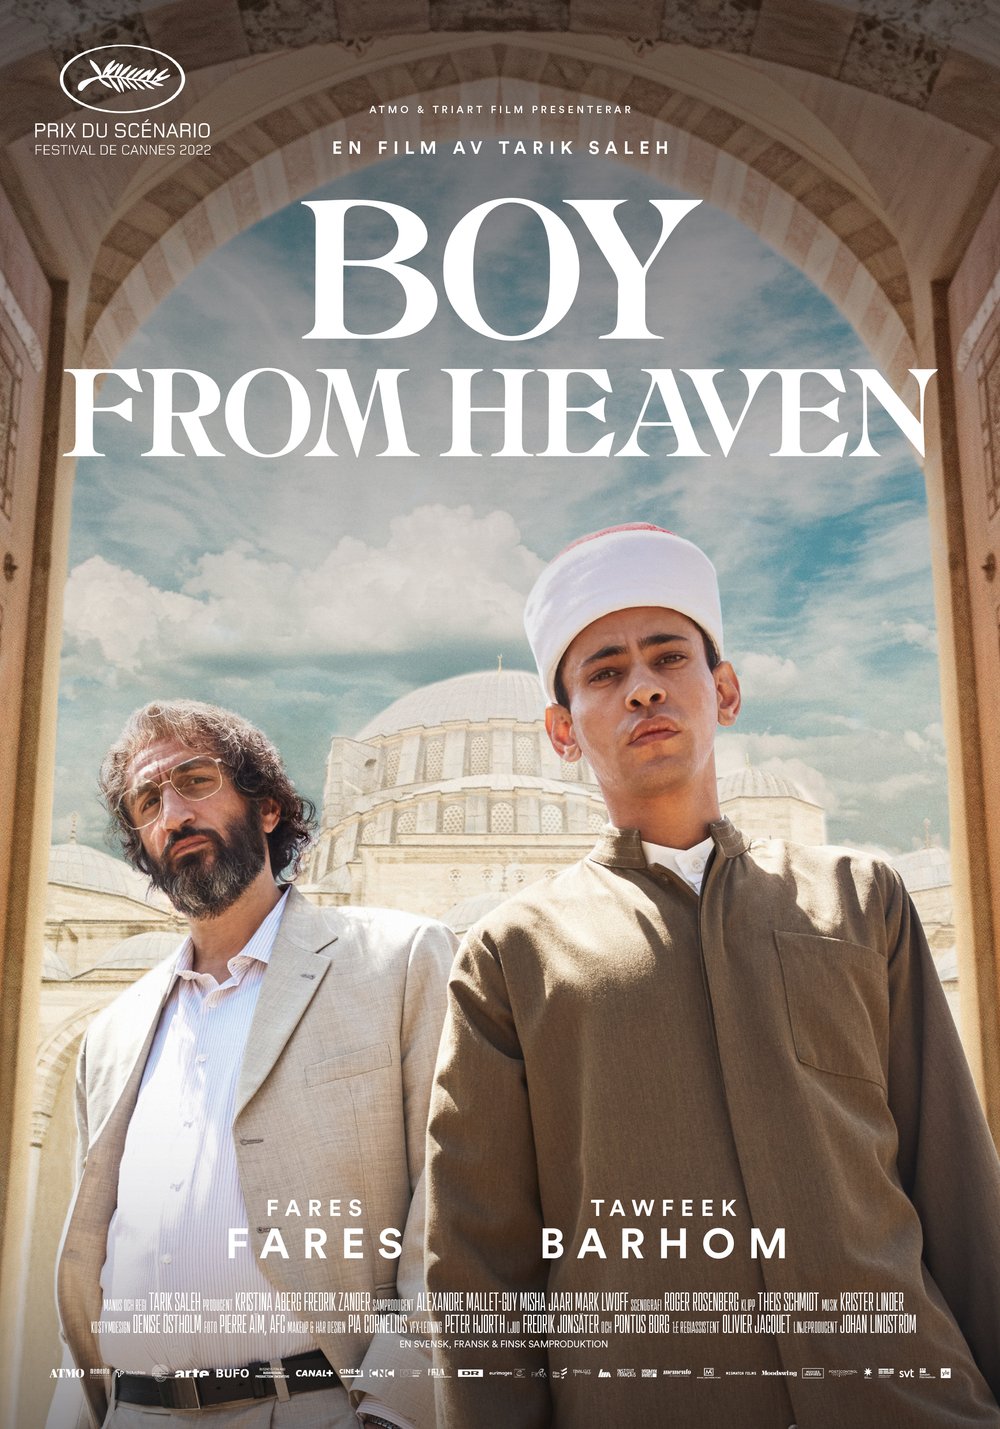 "Boy From Heaven" film poster (source: TriArt Film)